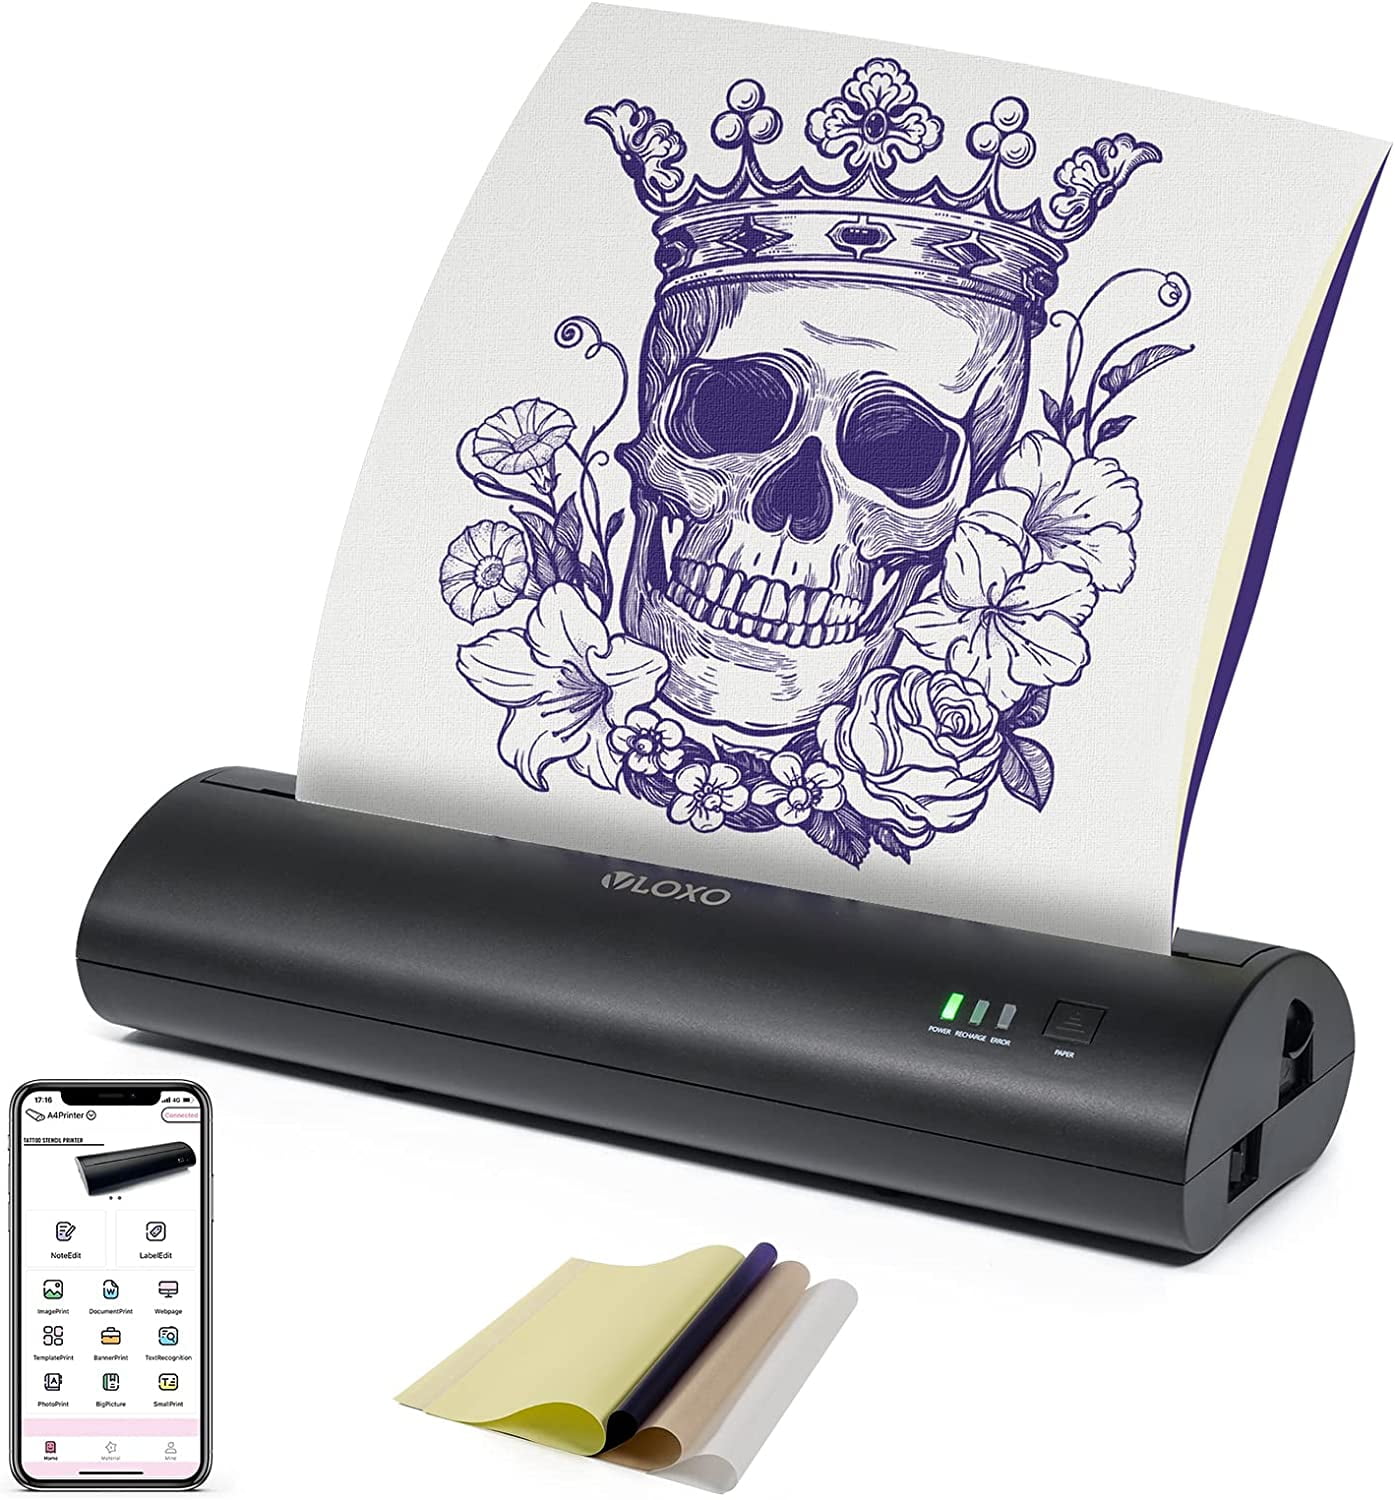 Tattoo Stencil Transfer Paper A4 Size Thermal Copier Paper Supplies Tattoo  Accessories For Tattoo Supply From Bawanbian, $12.88